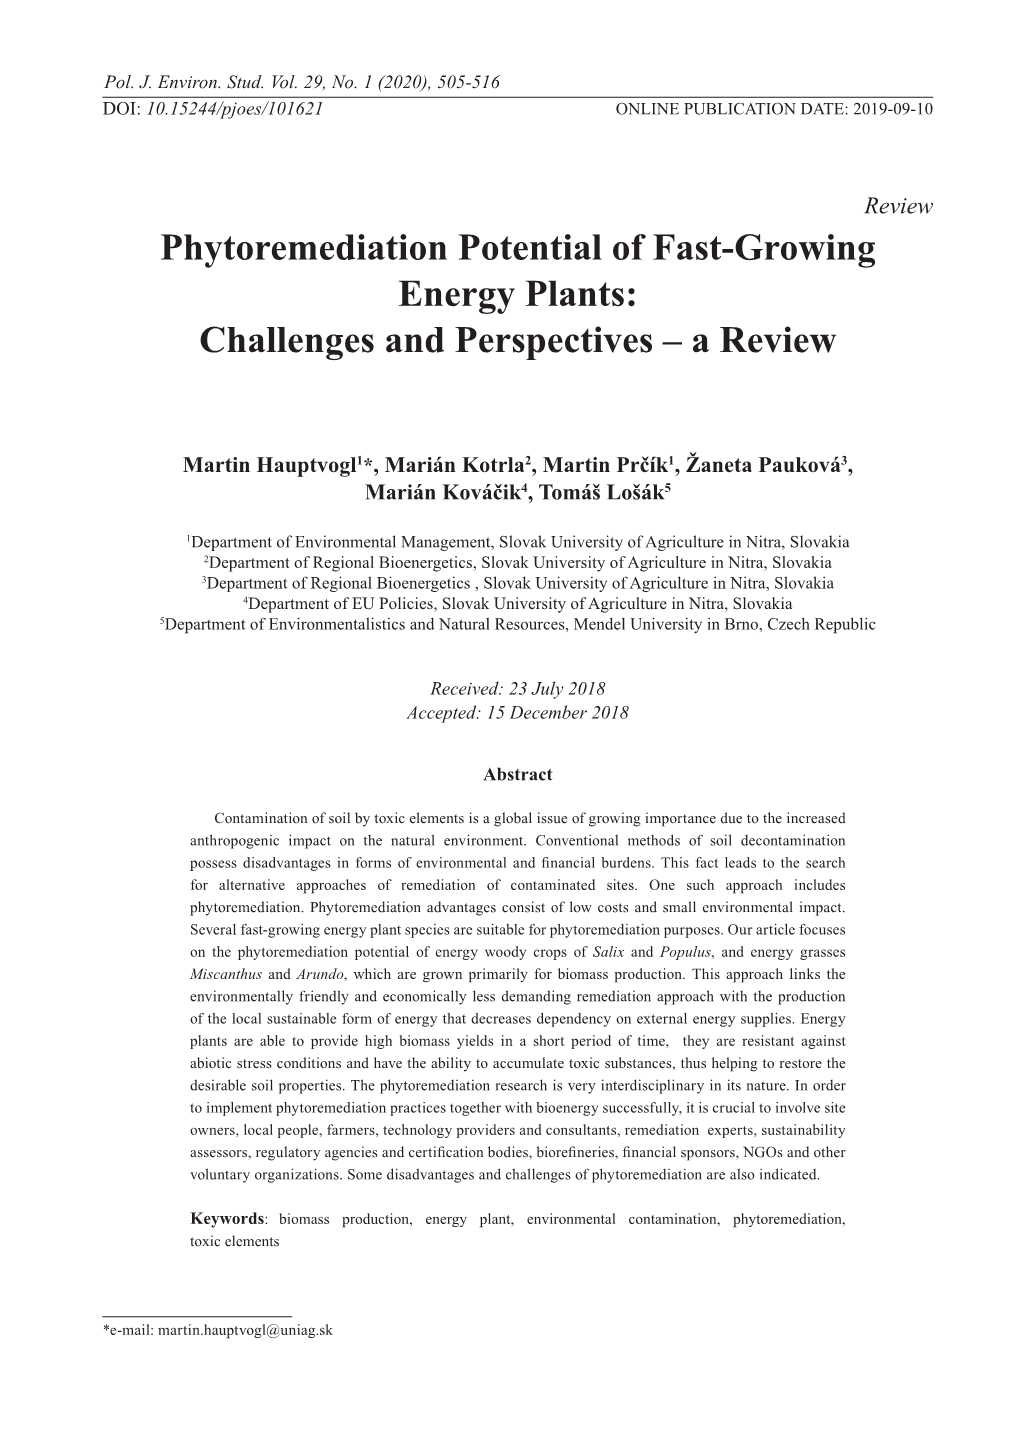 Phytoremediation Potential of Fast-Growing Energy Plants: Challenges and Perspectives – a Review